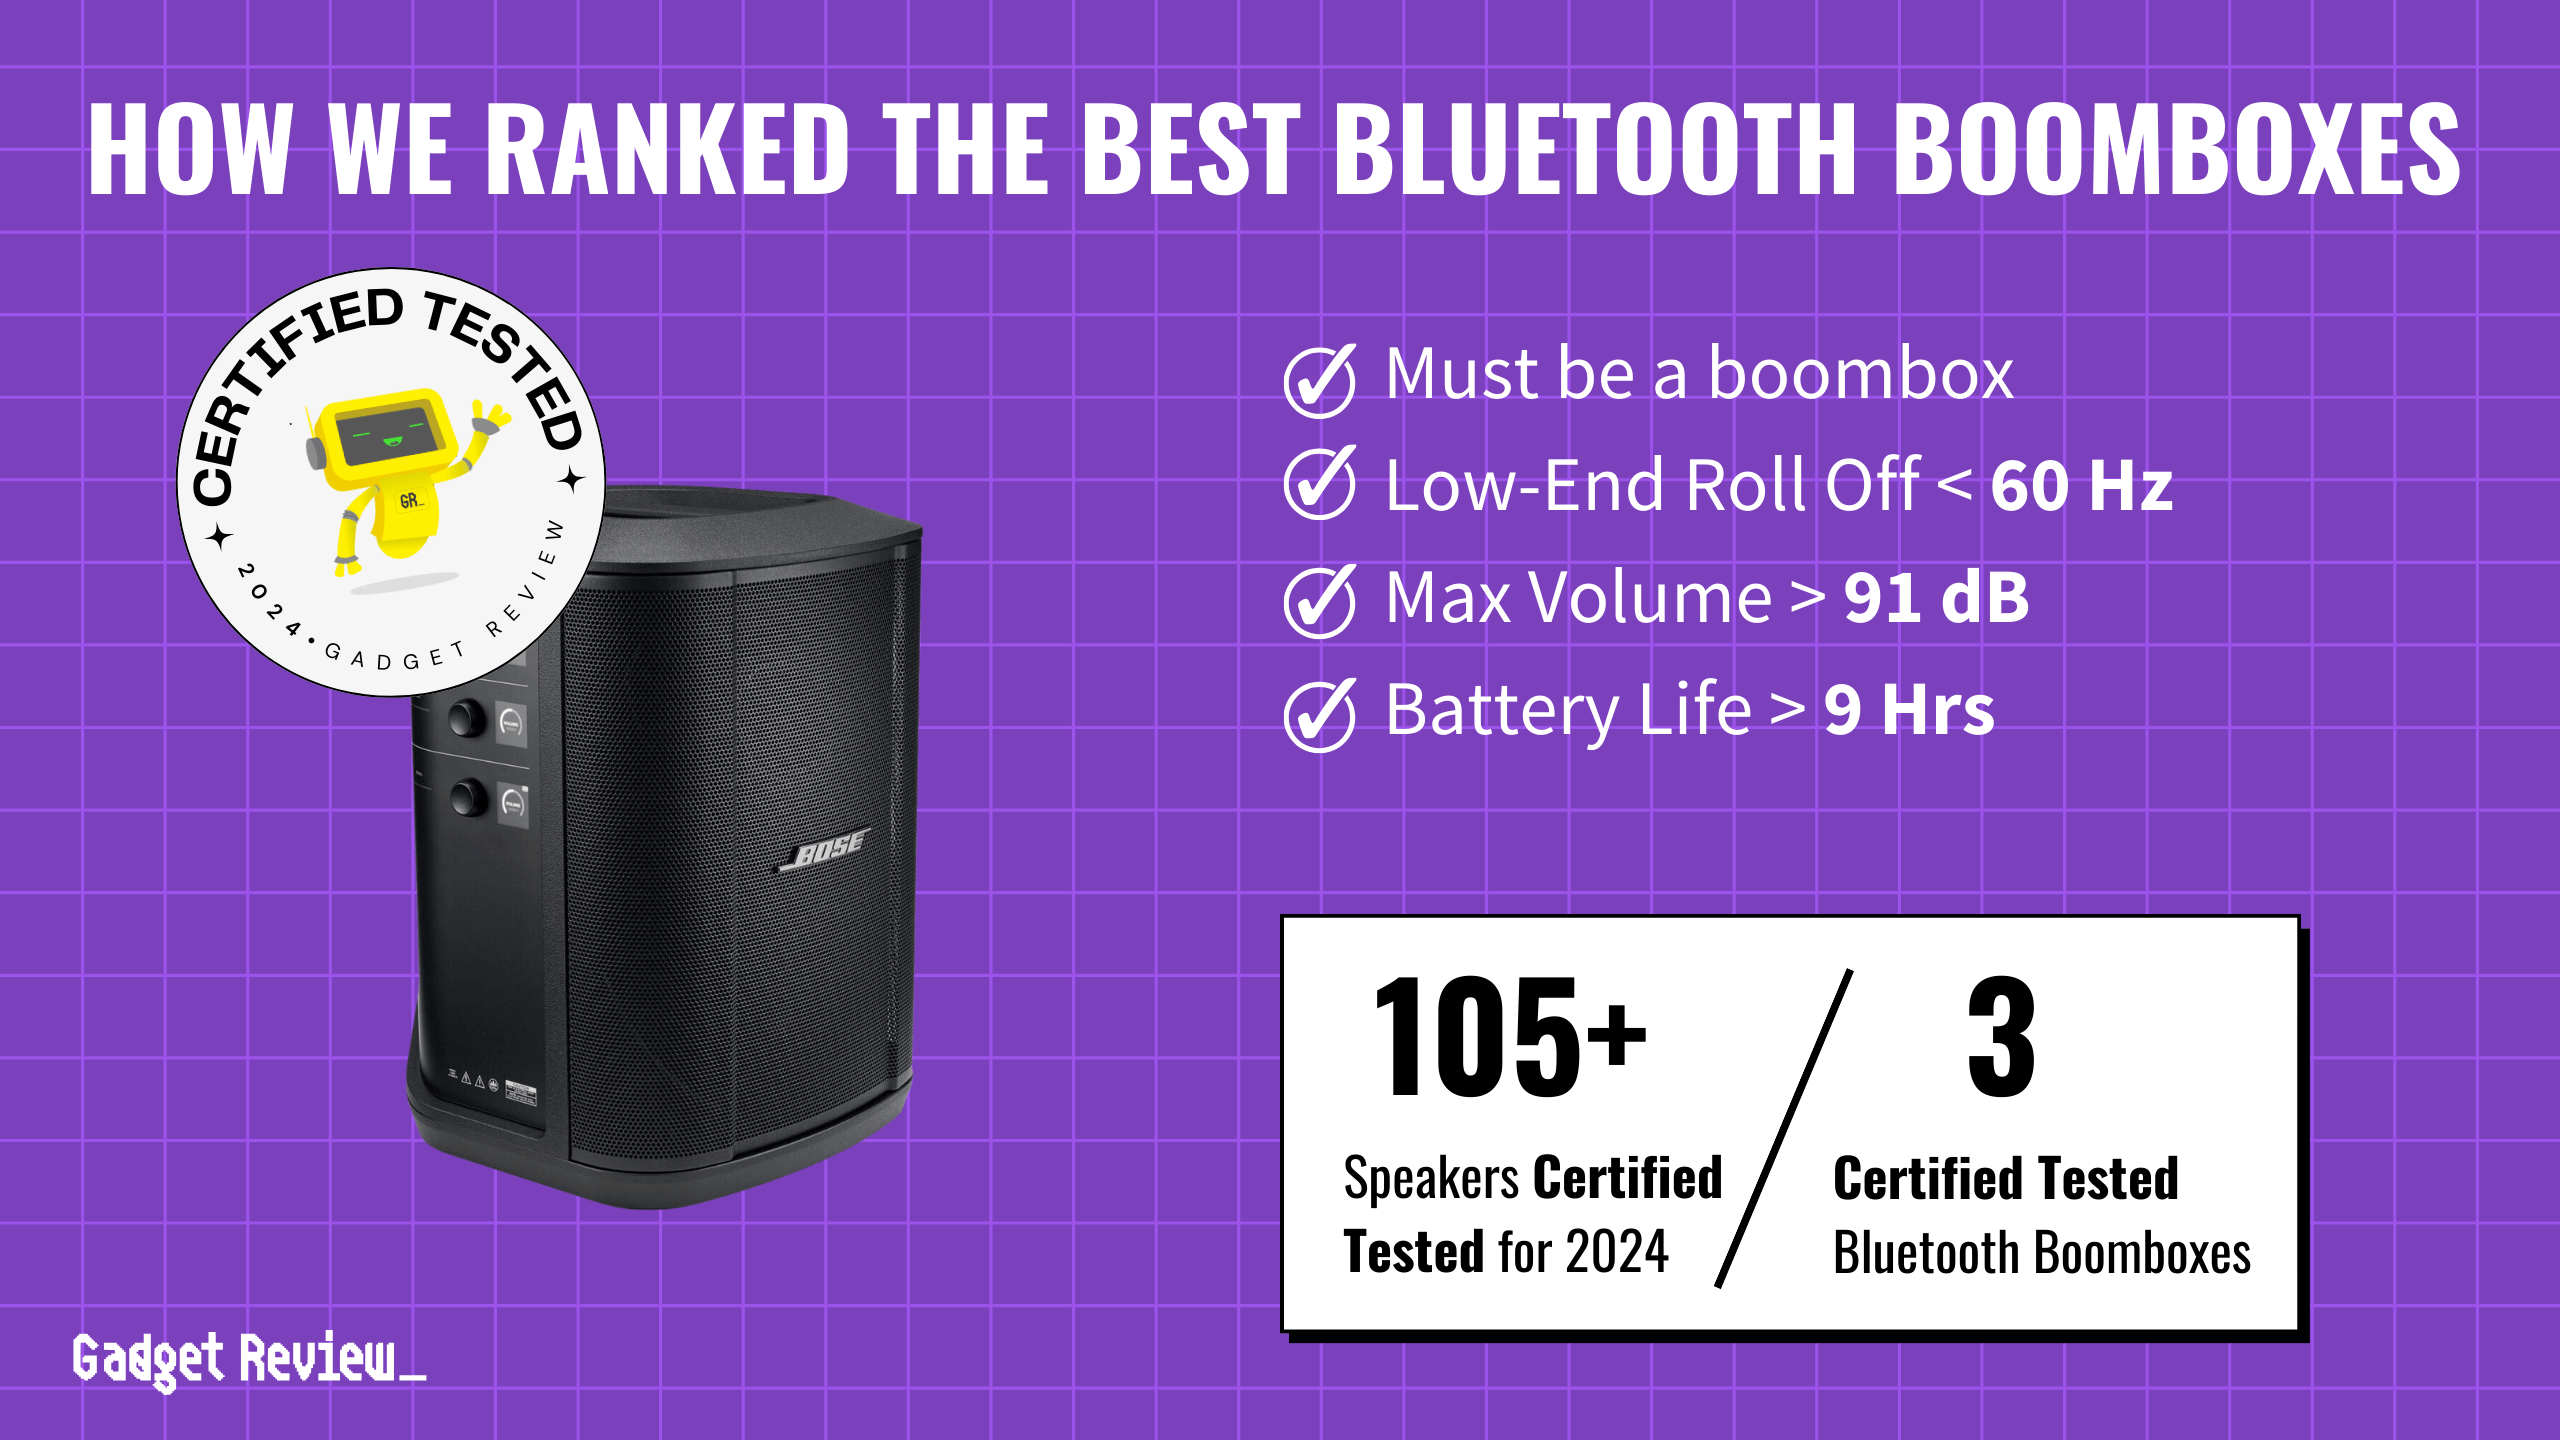 What’s the Best Bluetooth Boombox? 3 Options Ranked